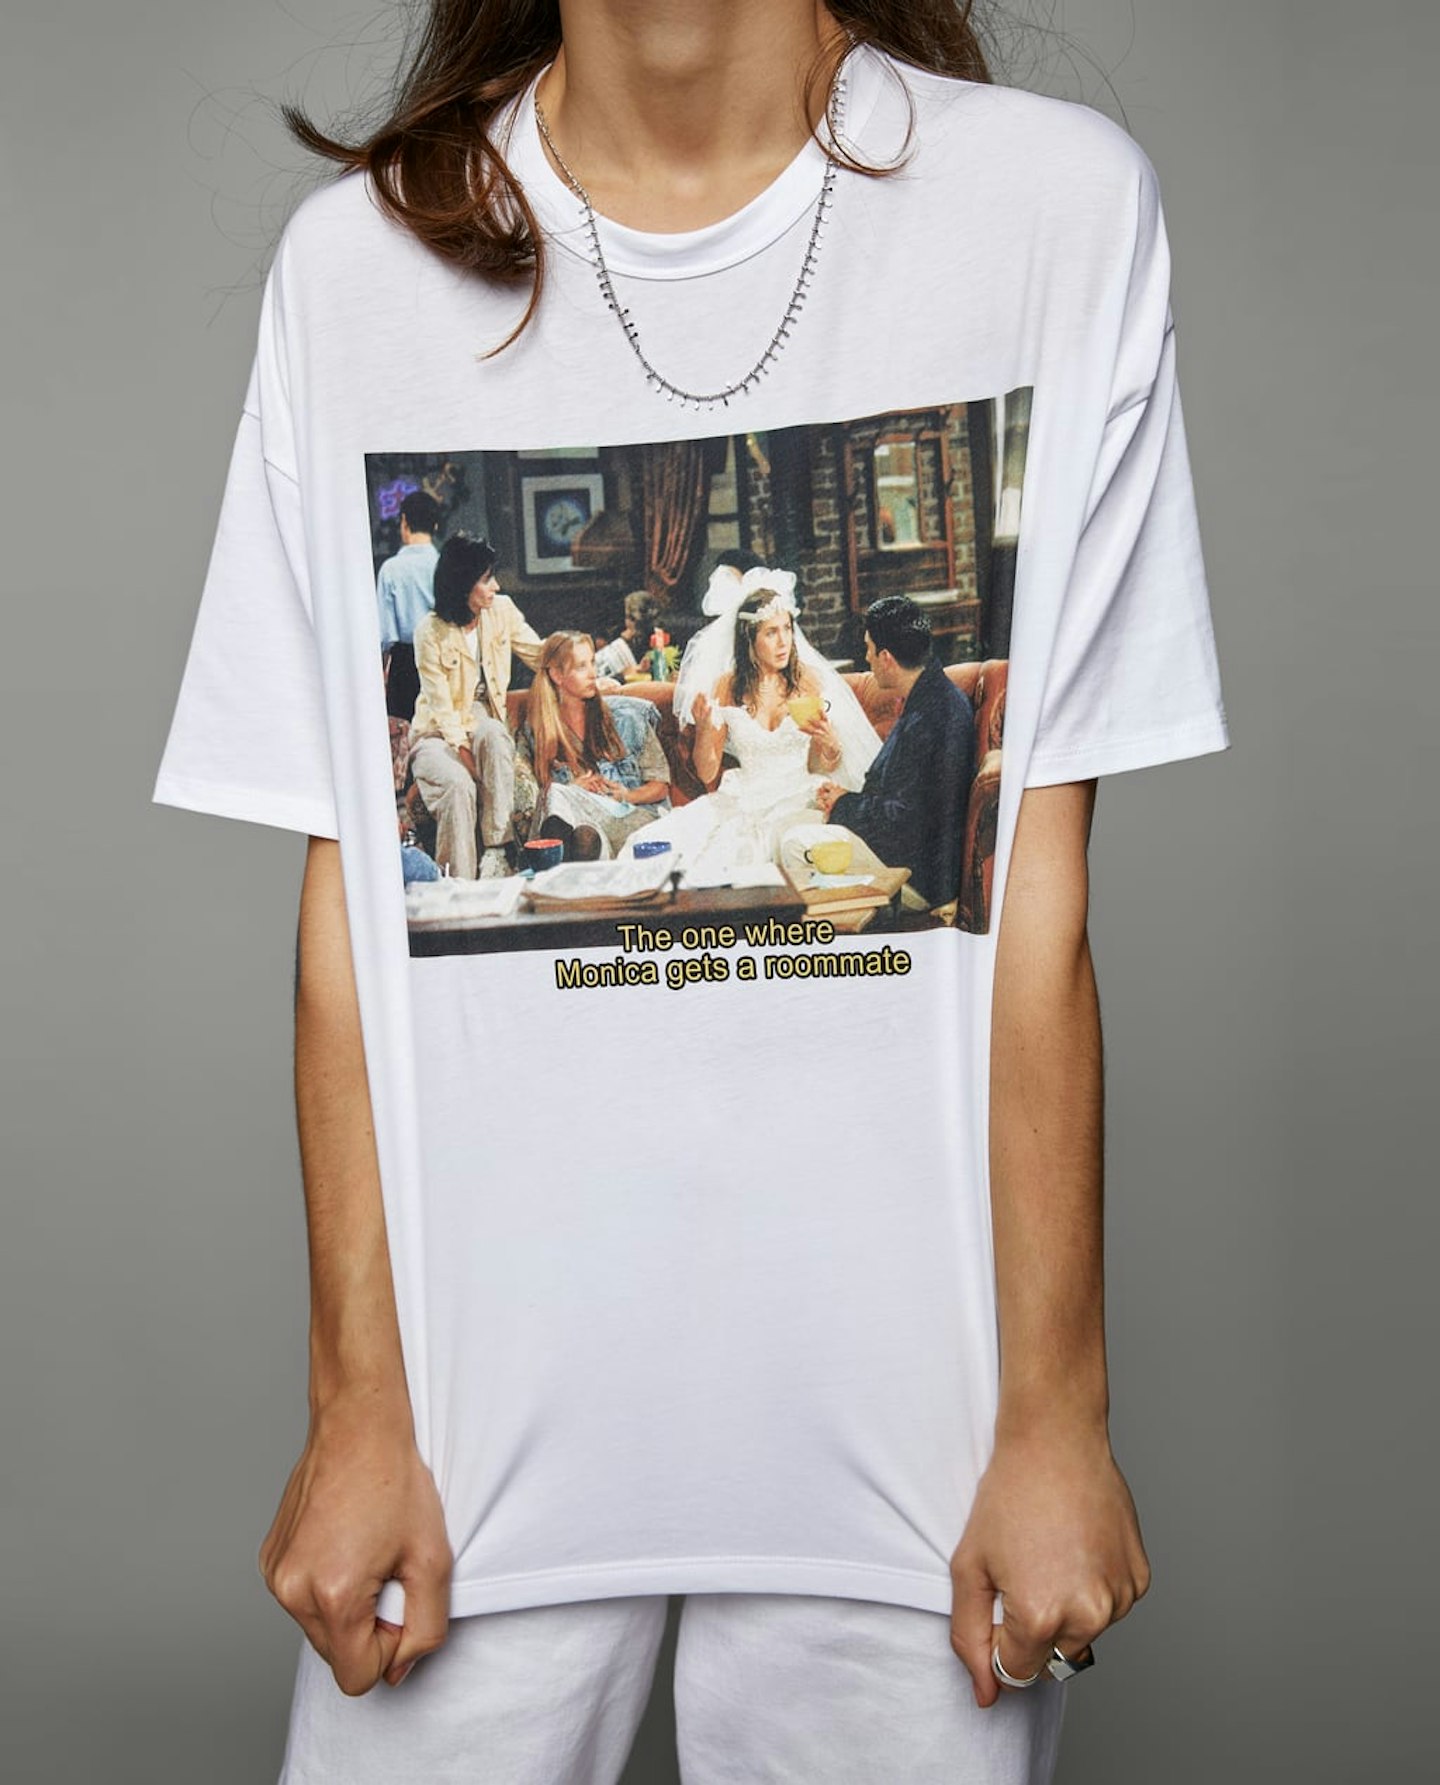 Zara Has A 'Friends' T-Shirt Line That You'll Definitely Want To